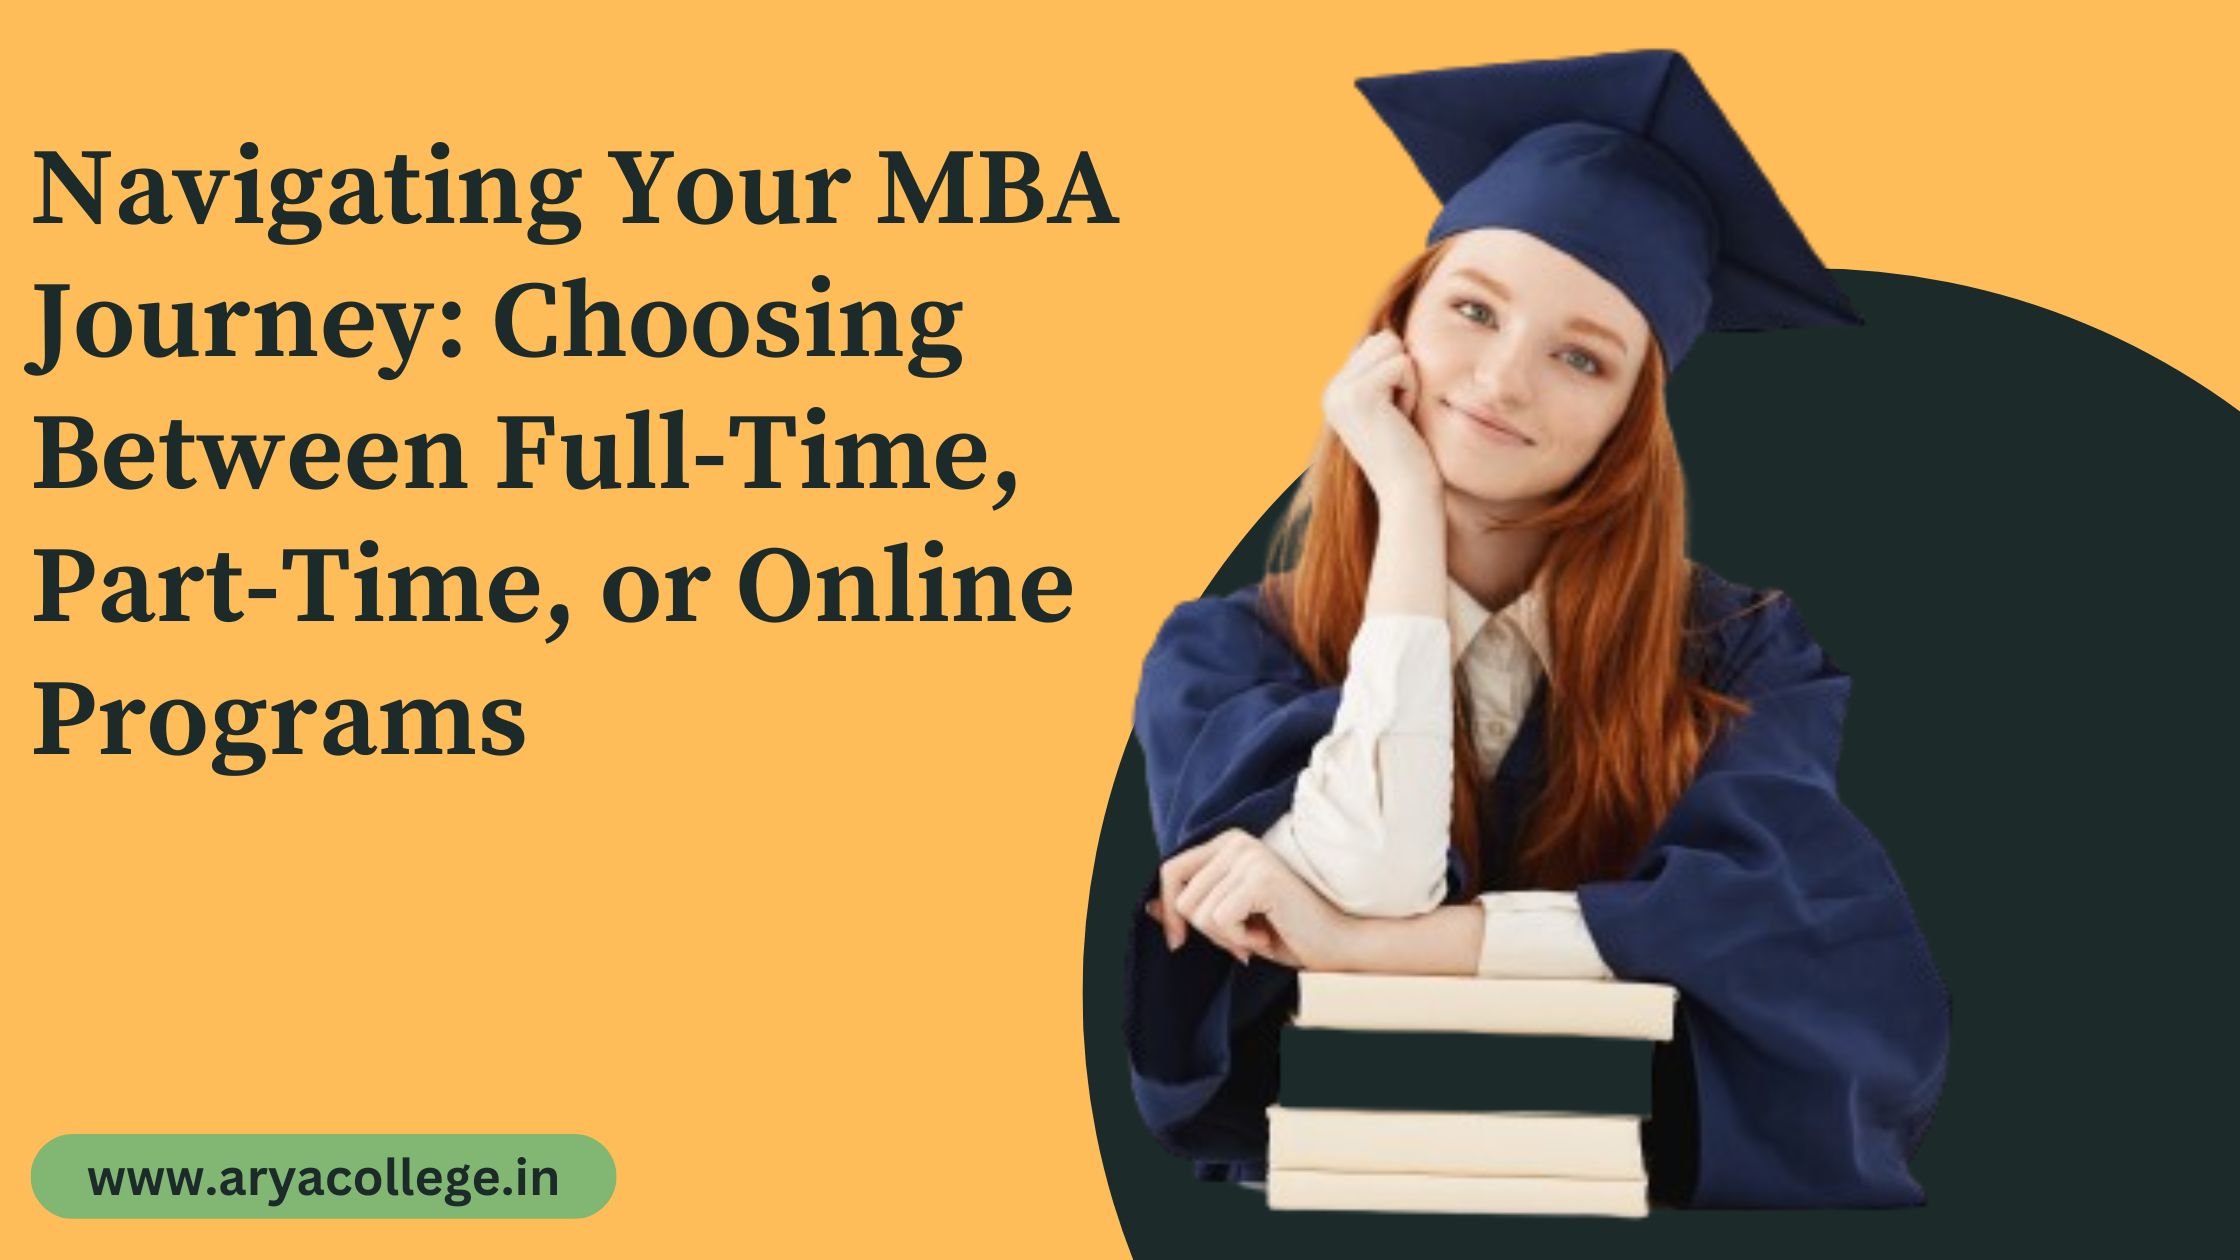 Navigating Your MBA Journey: Choosing Between Full-Time, Part-Time, or Online Programs